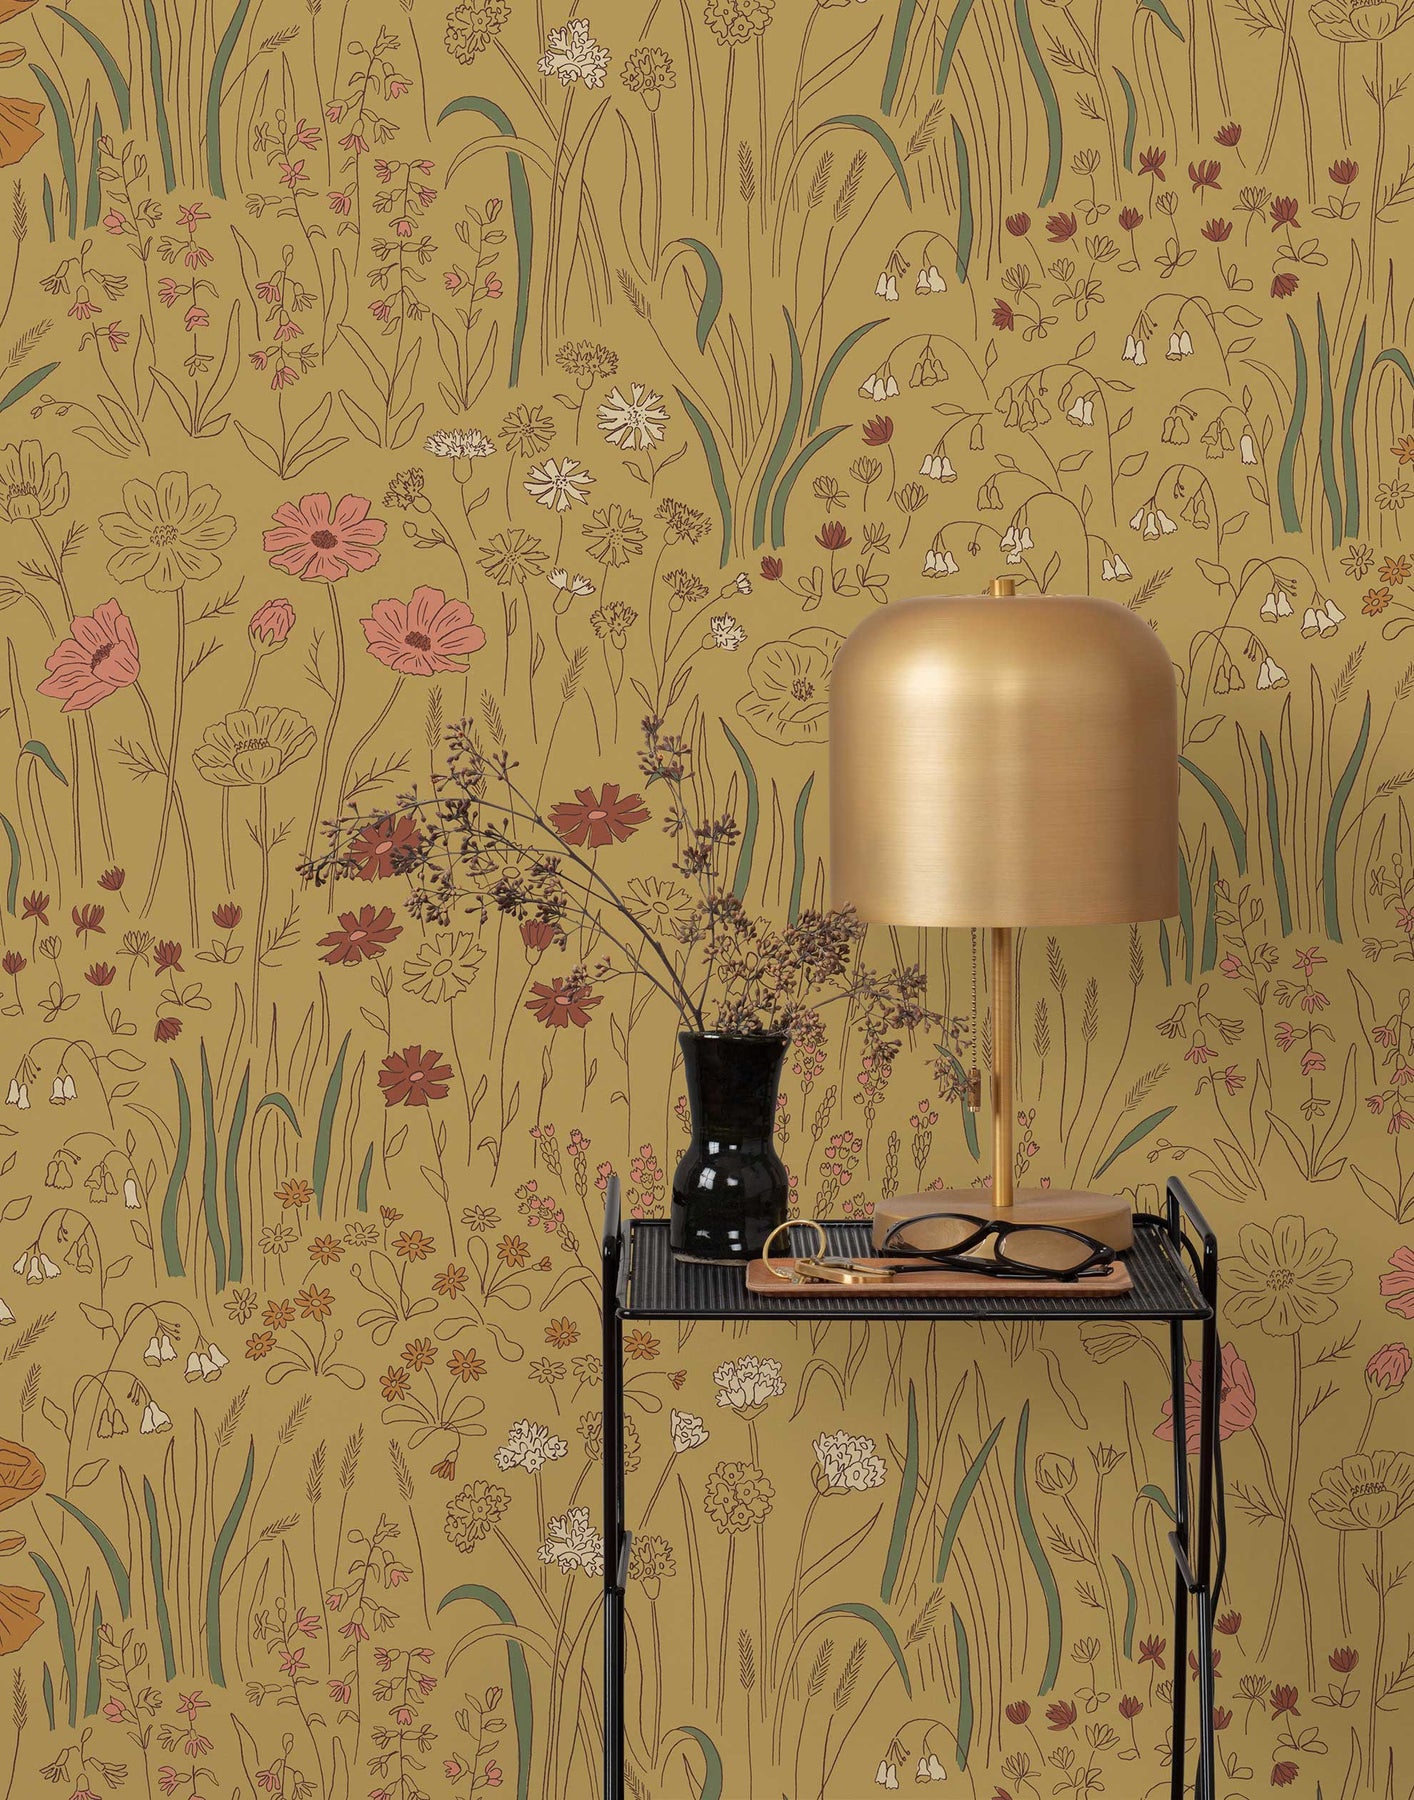 Contemporary Modern Wallpaper Patterns And Designs Hygge West